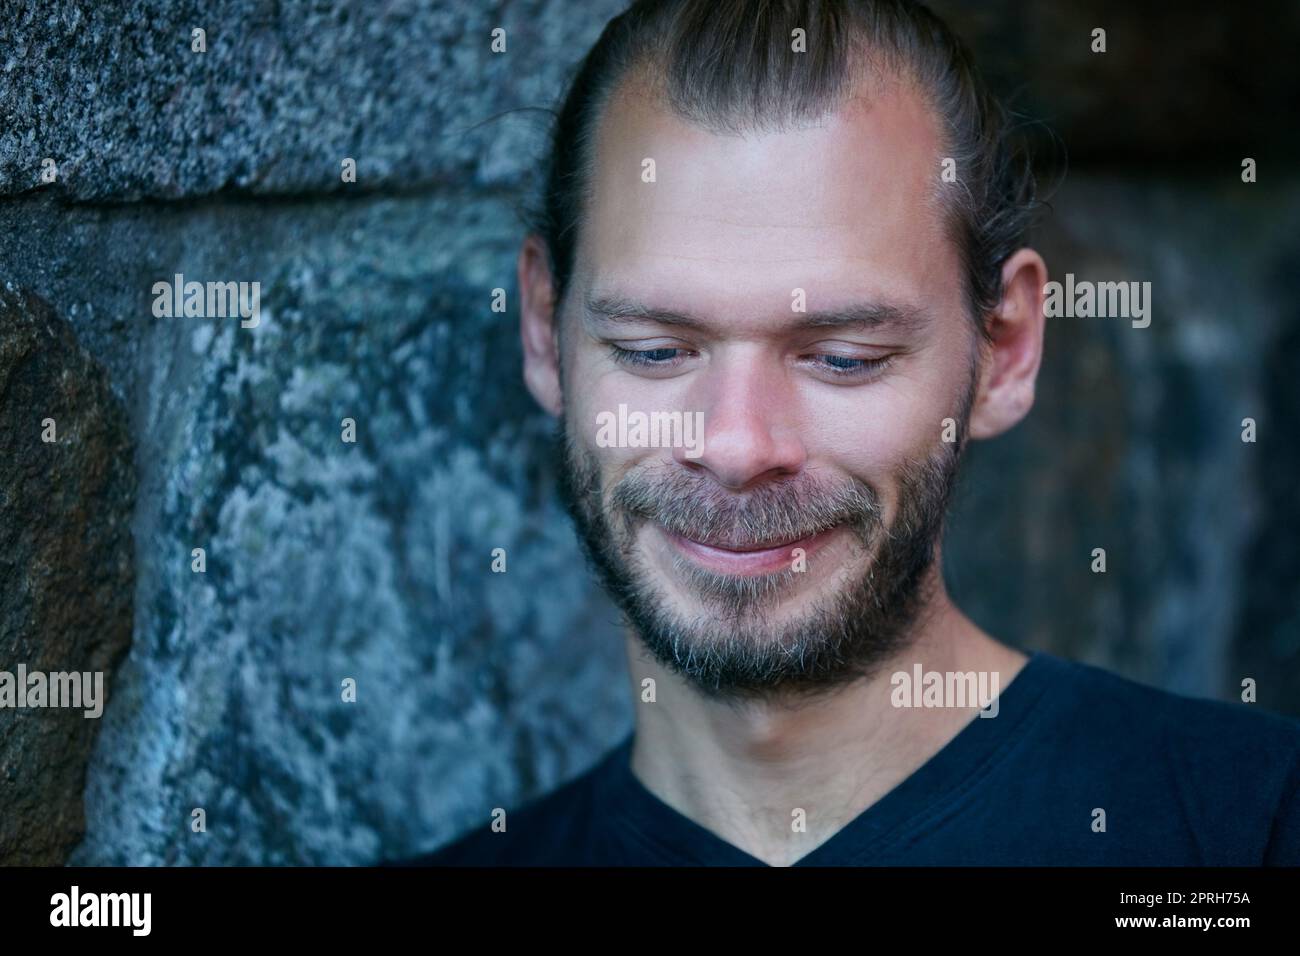 Being himself. Portrait of a man leaning against a wall outside. Stock Photo